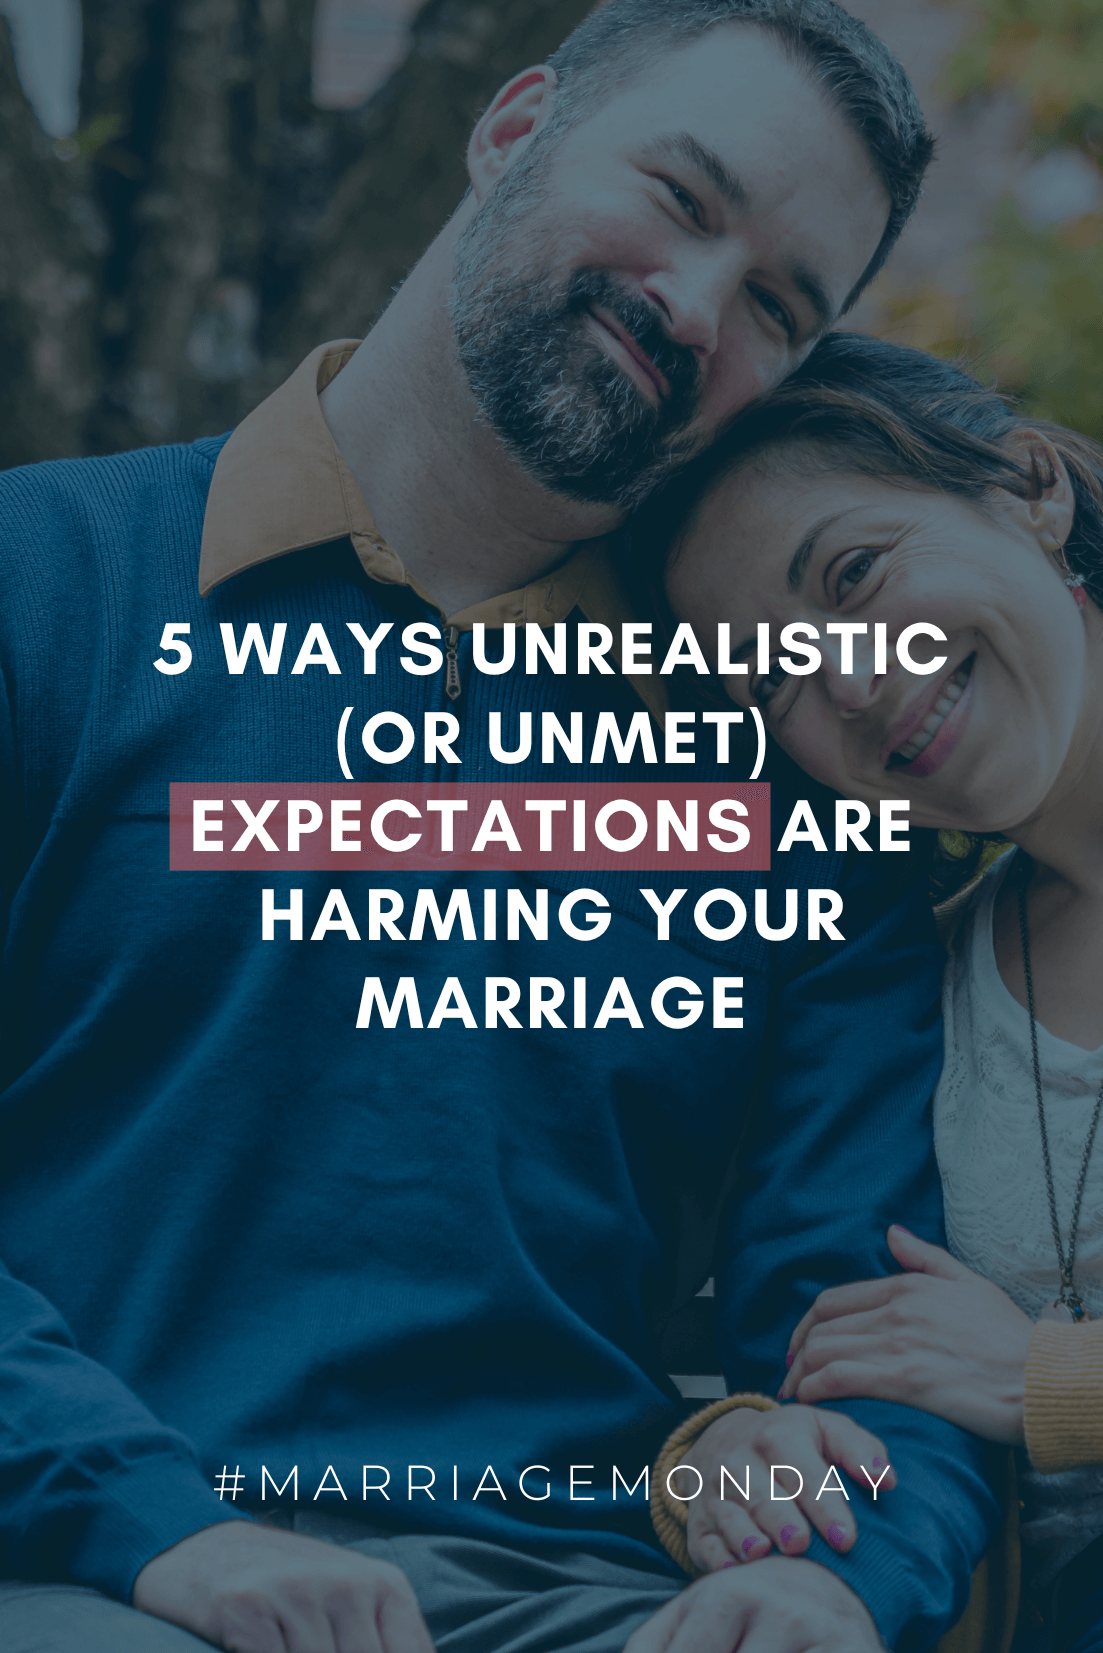 5 Ways Unrealistic (or Unmet) Expectations Are Harming Your Marriage | #MarriageMonday